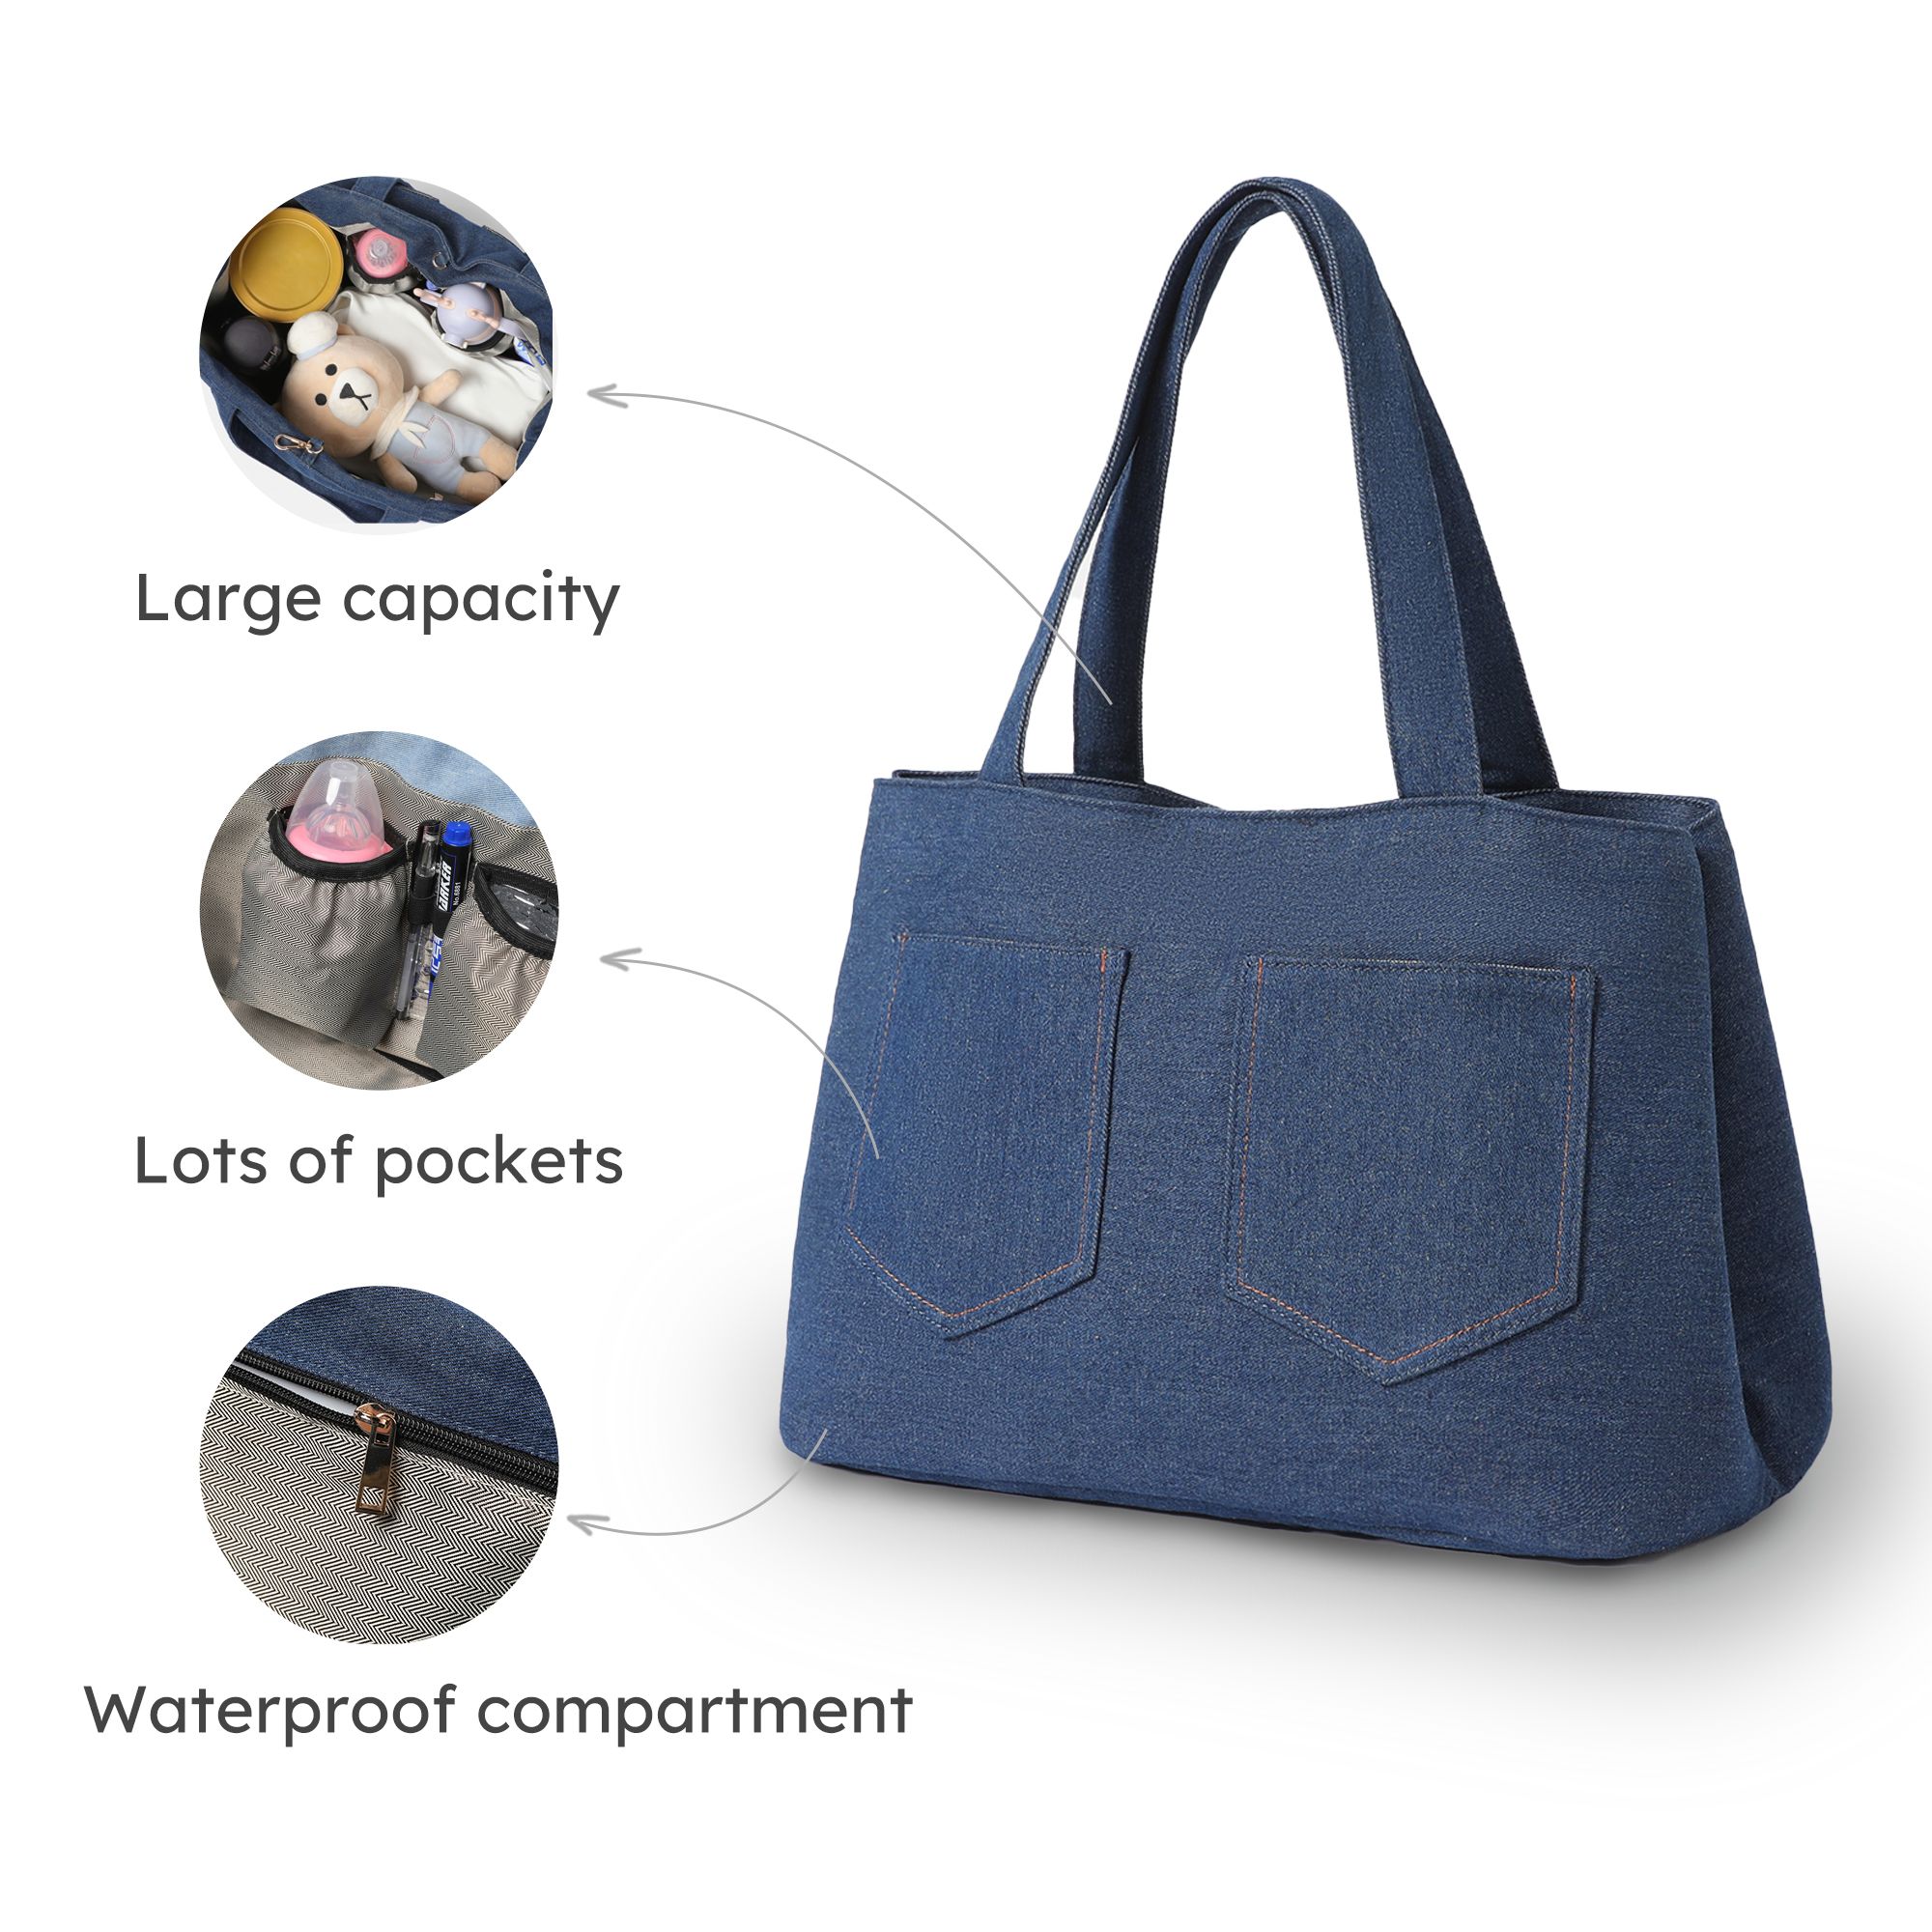 Multi-functional Diaper Tote Bag - With Built-in Insulated Compartment And Waterproof Pocket, And Easy To Adapt To Various Occasions.